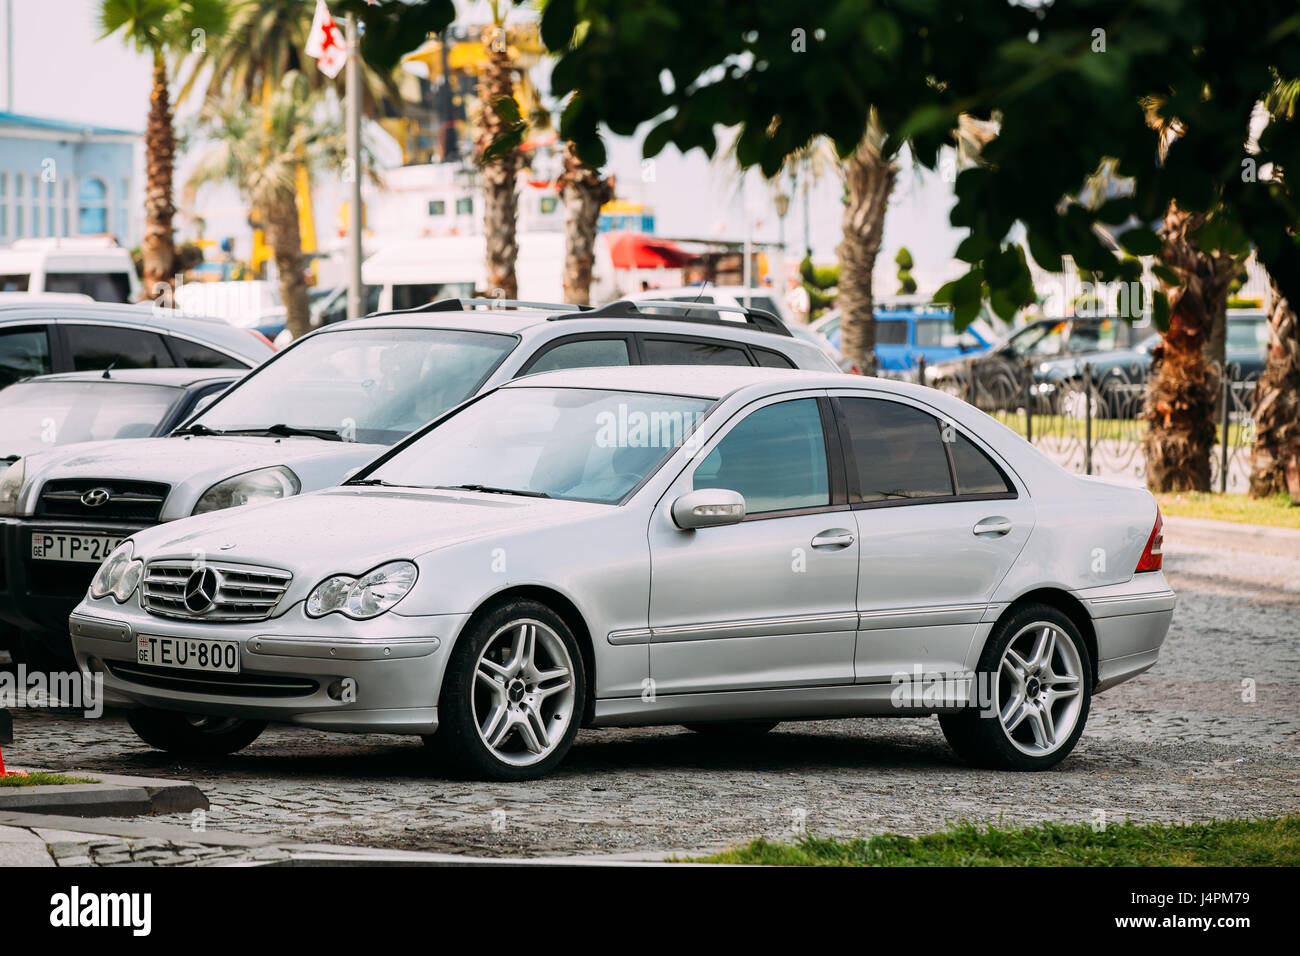 Batumi, Georgia - May 27, 2016: Mercedes-Benz C-Class (W203) Car Parked In  street on Sunny Summer Day. W203 is an automobile which was produced by Ger  Stock Photo - Alamy